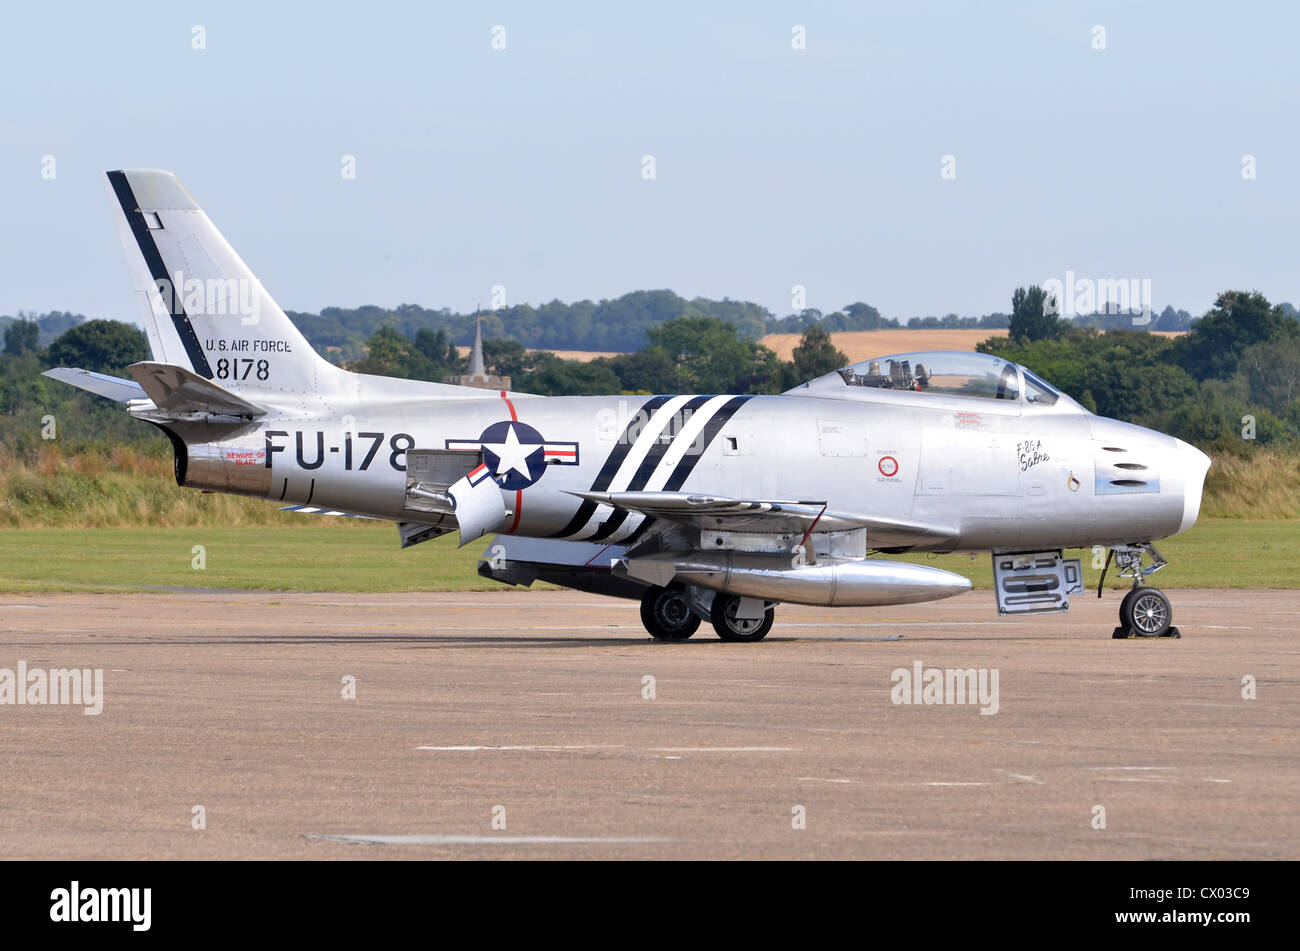 North American F-86A Sabre in US Air Force markings on display at Duxford Airshow 2012 Stock Photo